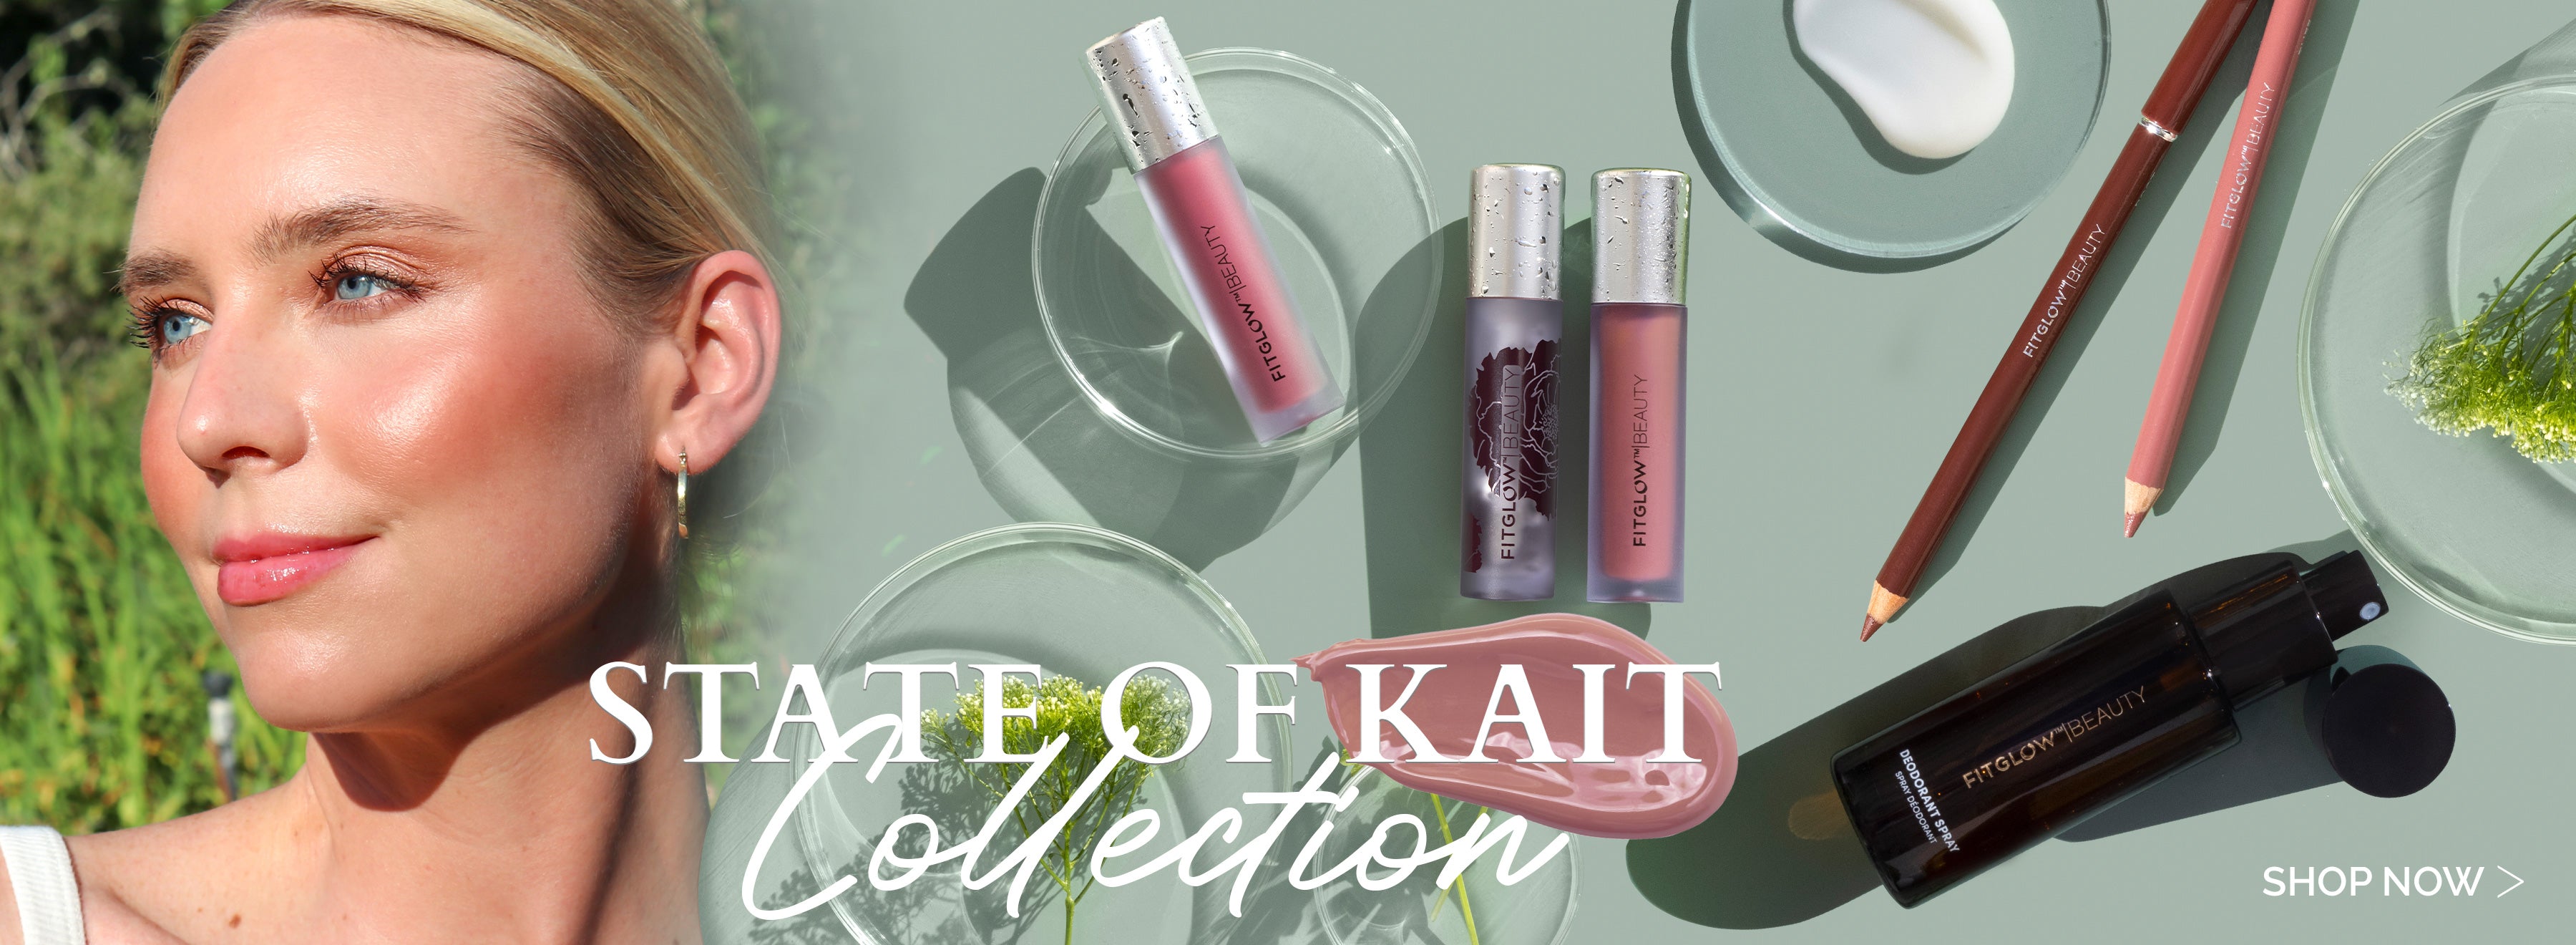 State of Kait Collection - Shop Now